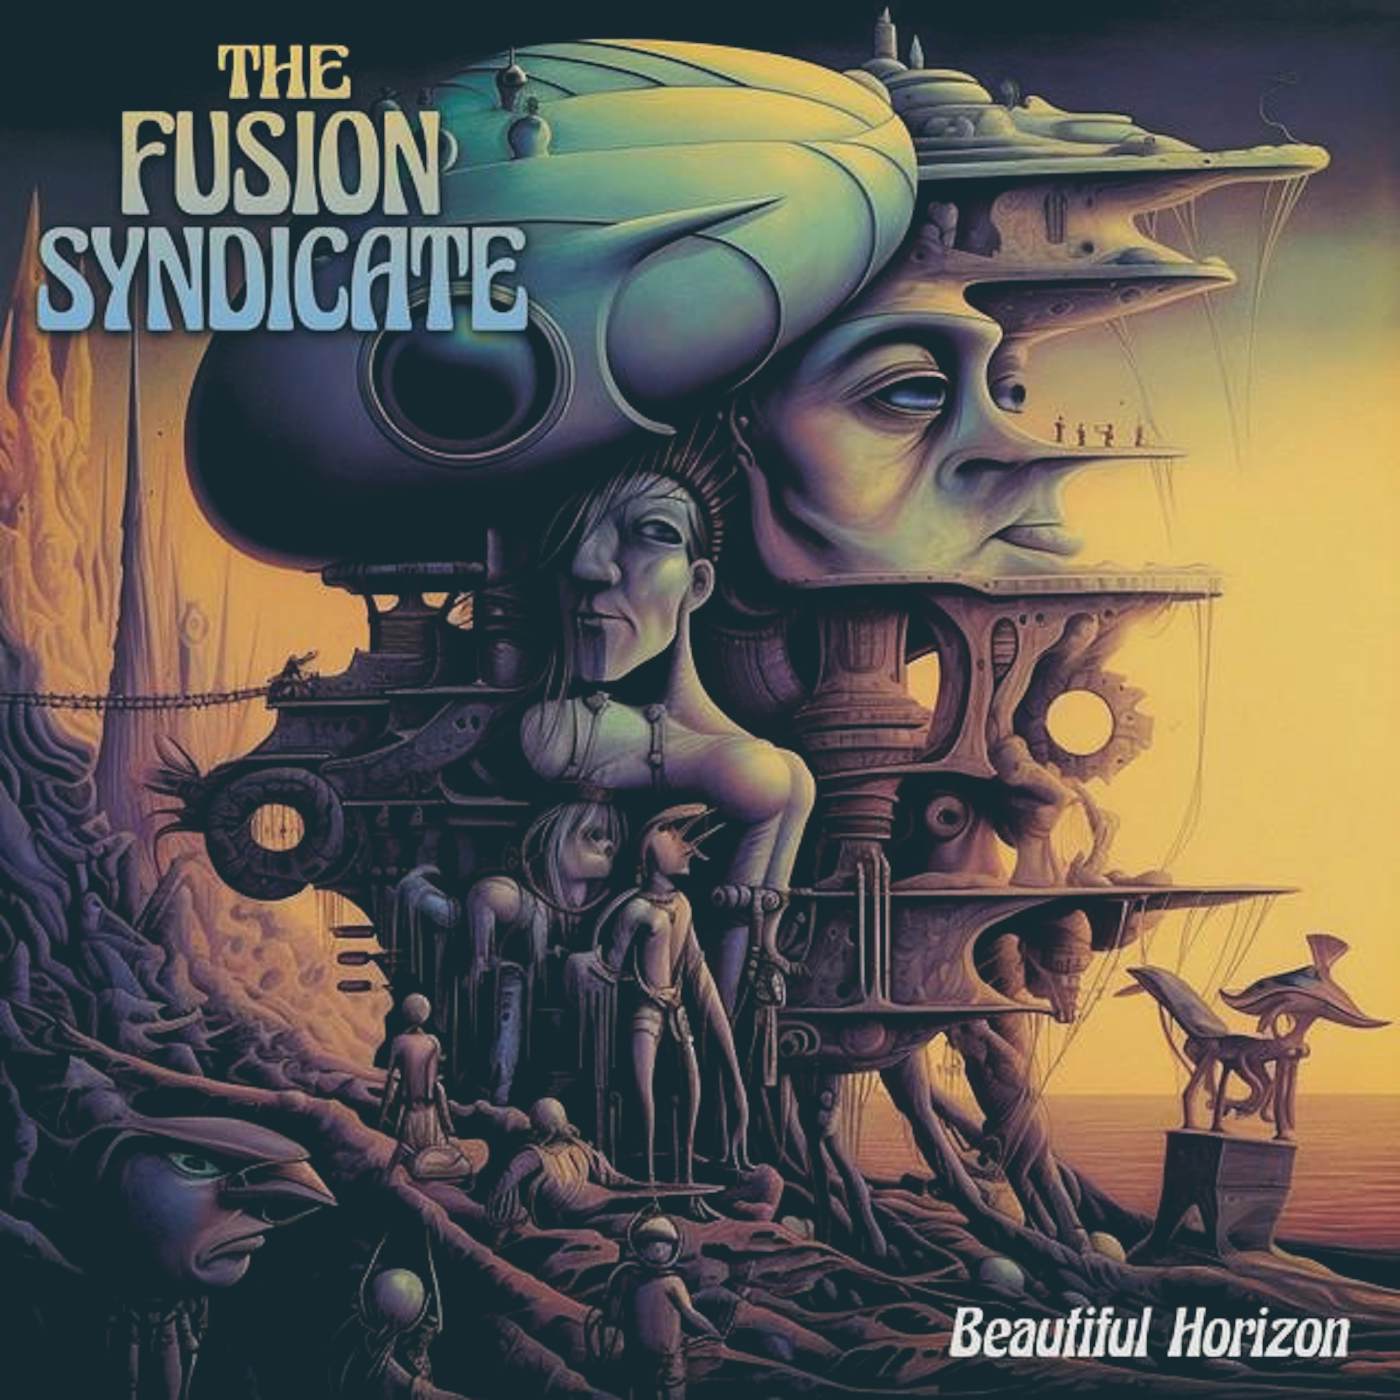 The Fusion Syndicate